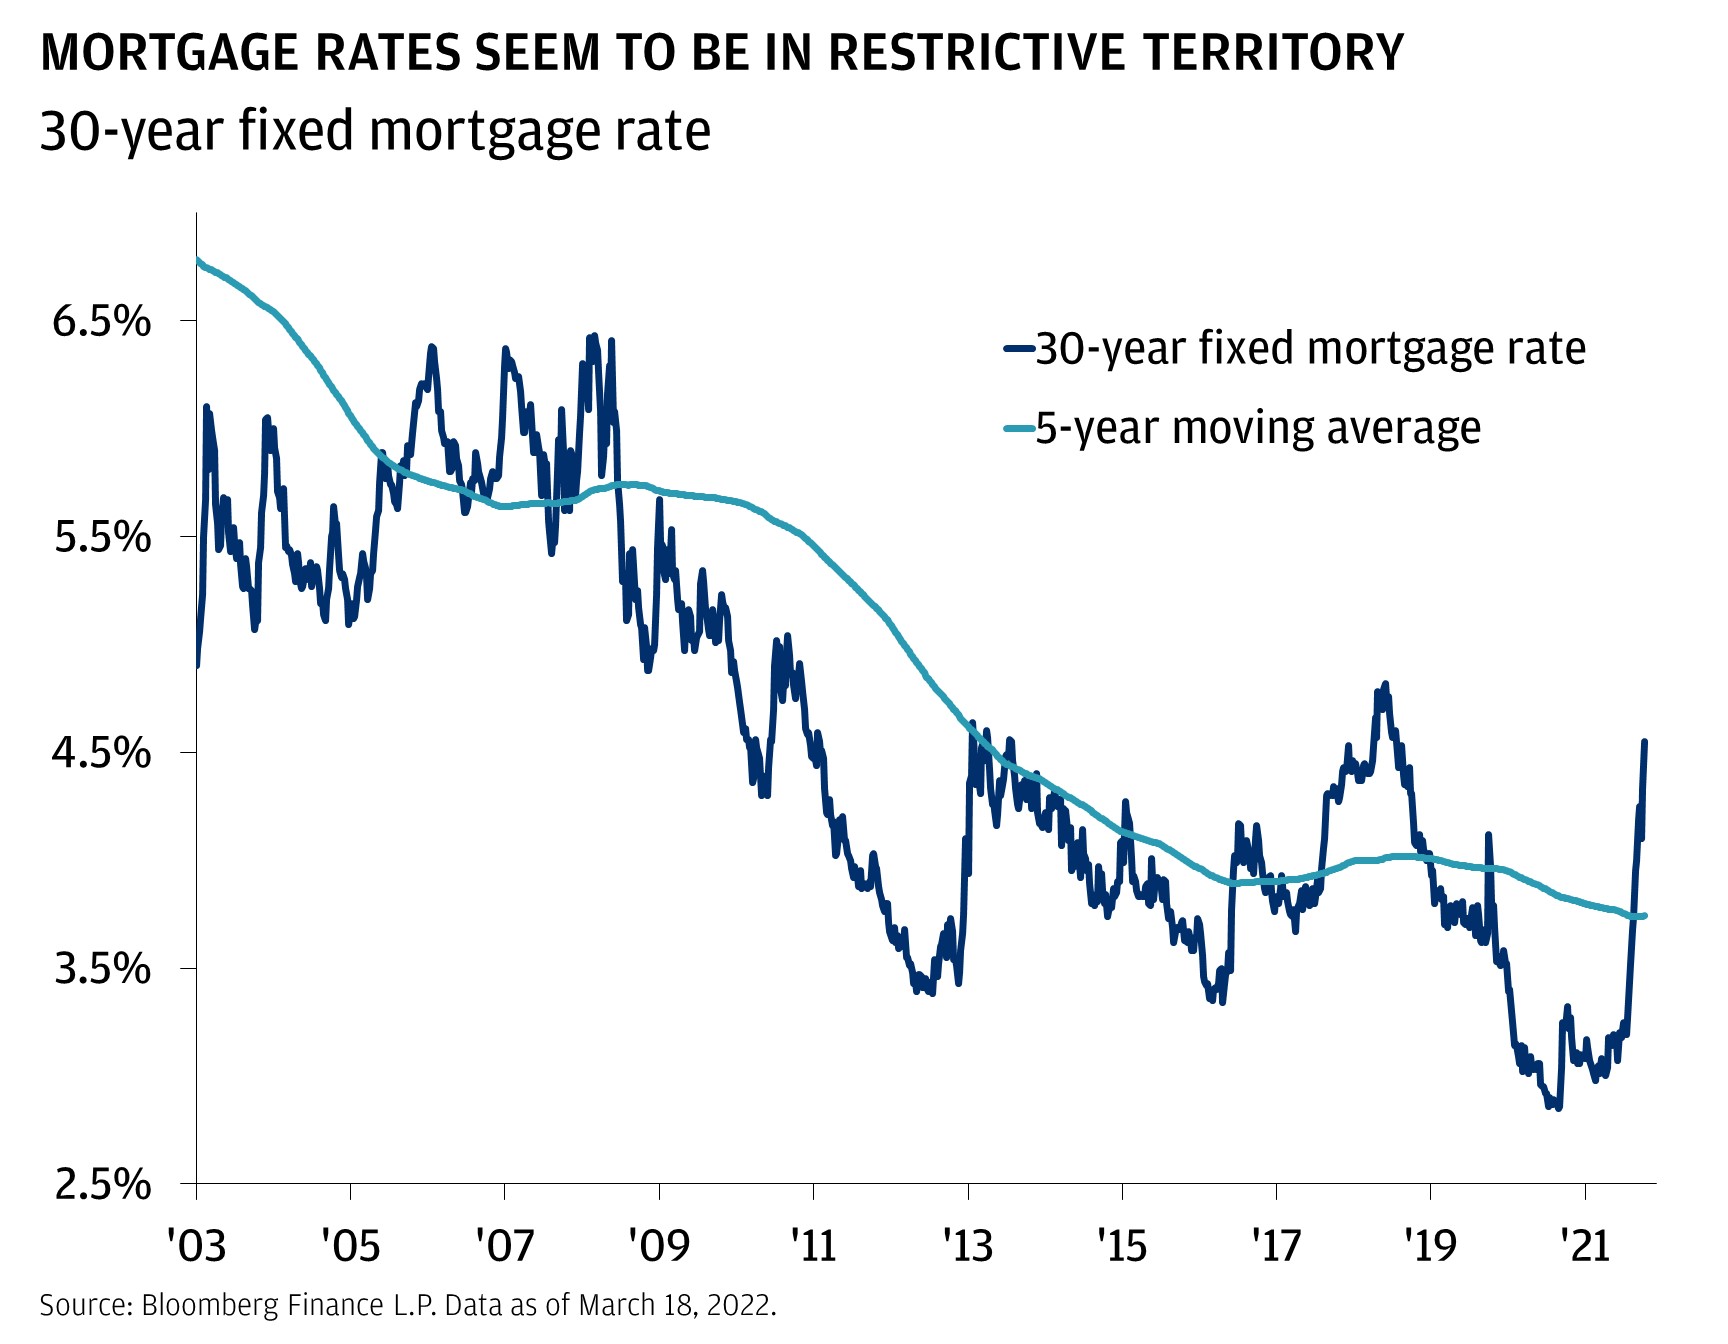 Infographic Mortgage rates seem to be in restrictive territory